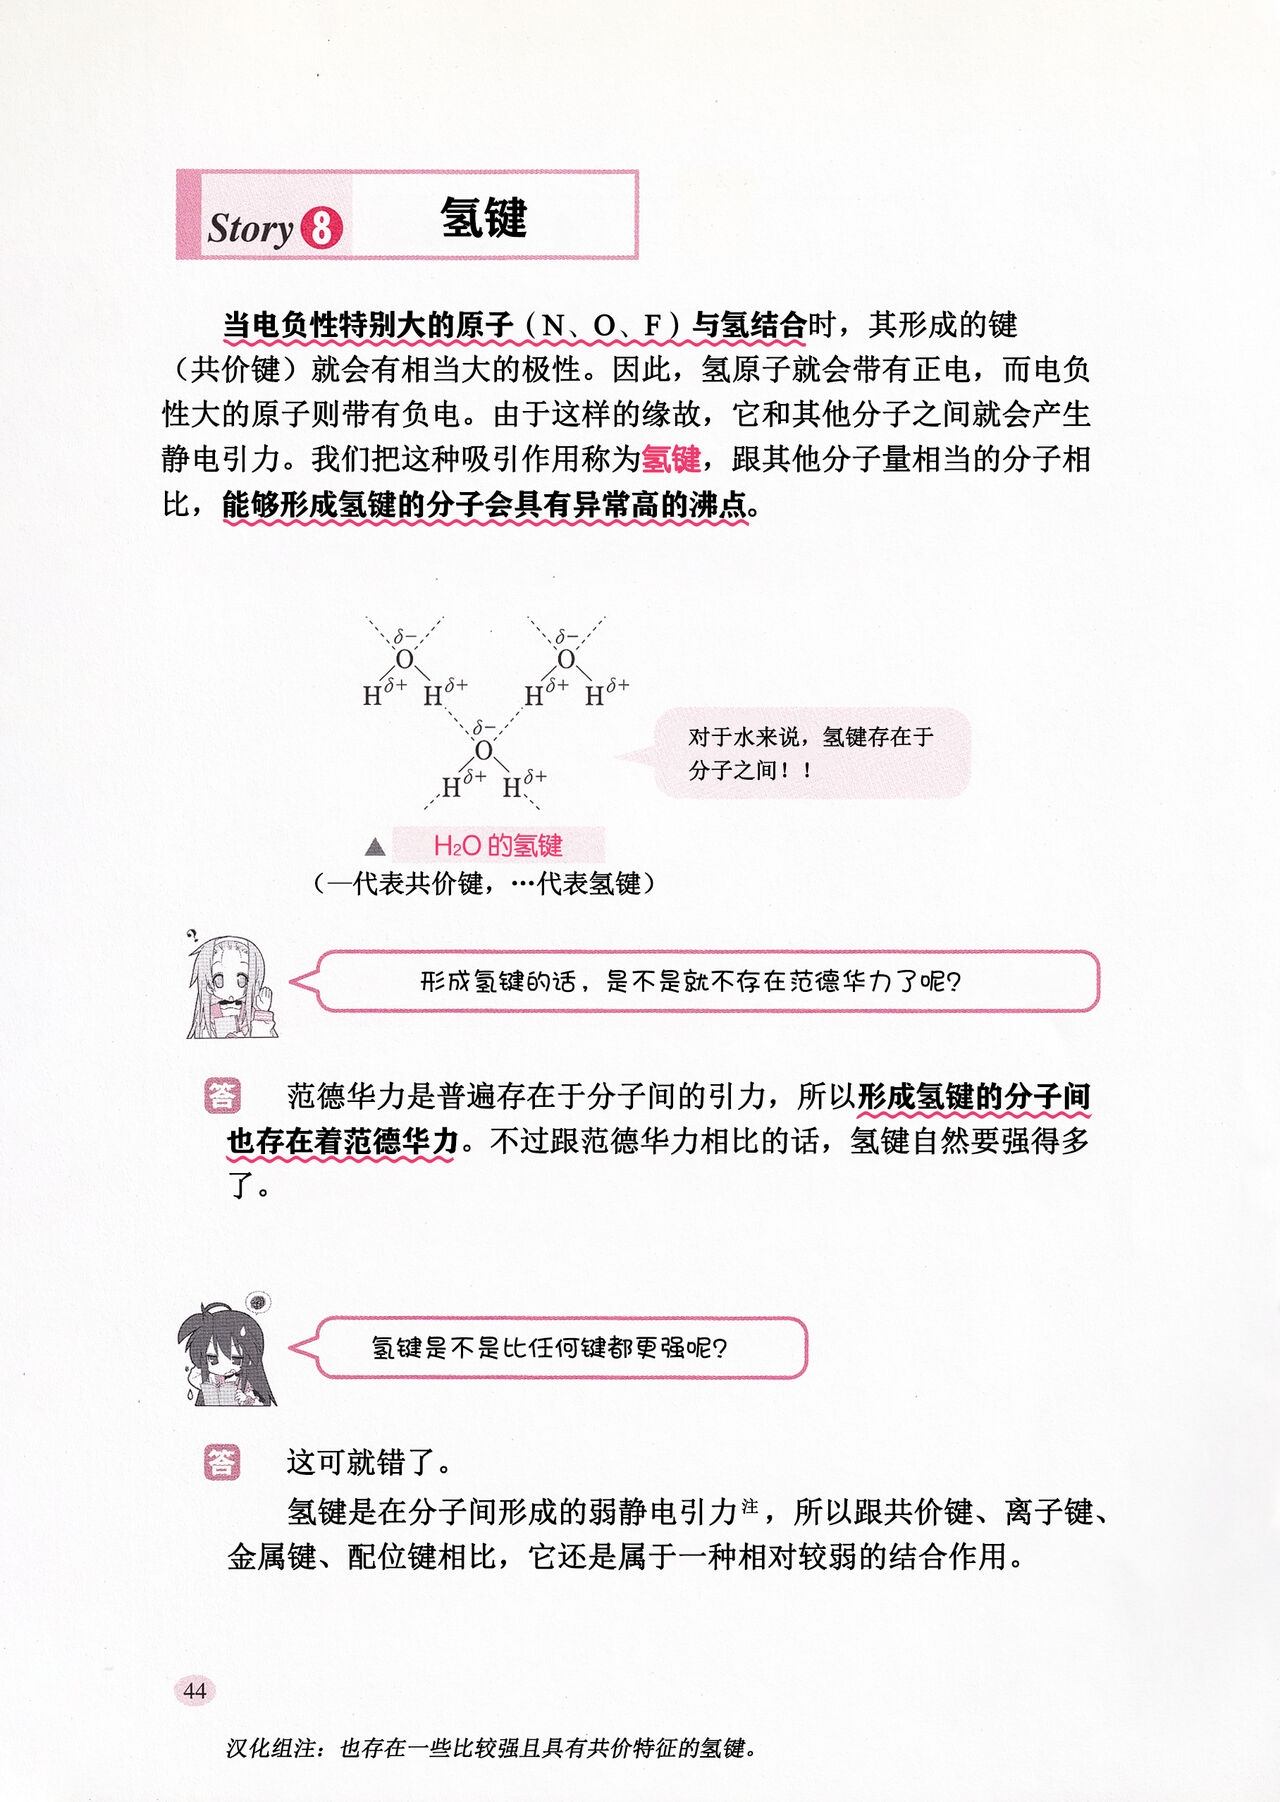 Let's Learn Chemistry with Lucky☆Star -Basic Theory- Section 1-5|和幸运星一起学化学 -理论篇- 第1-5章[Chinese][桃樹漢化組] 53